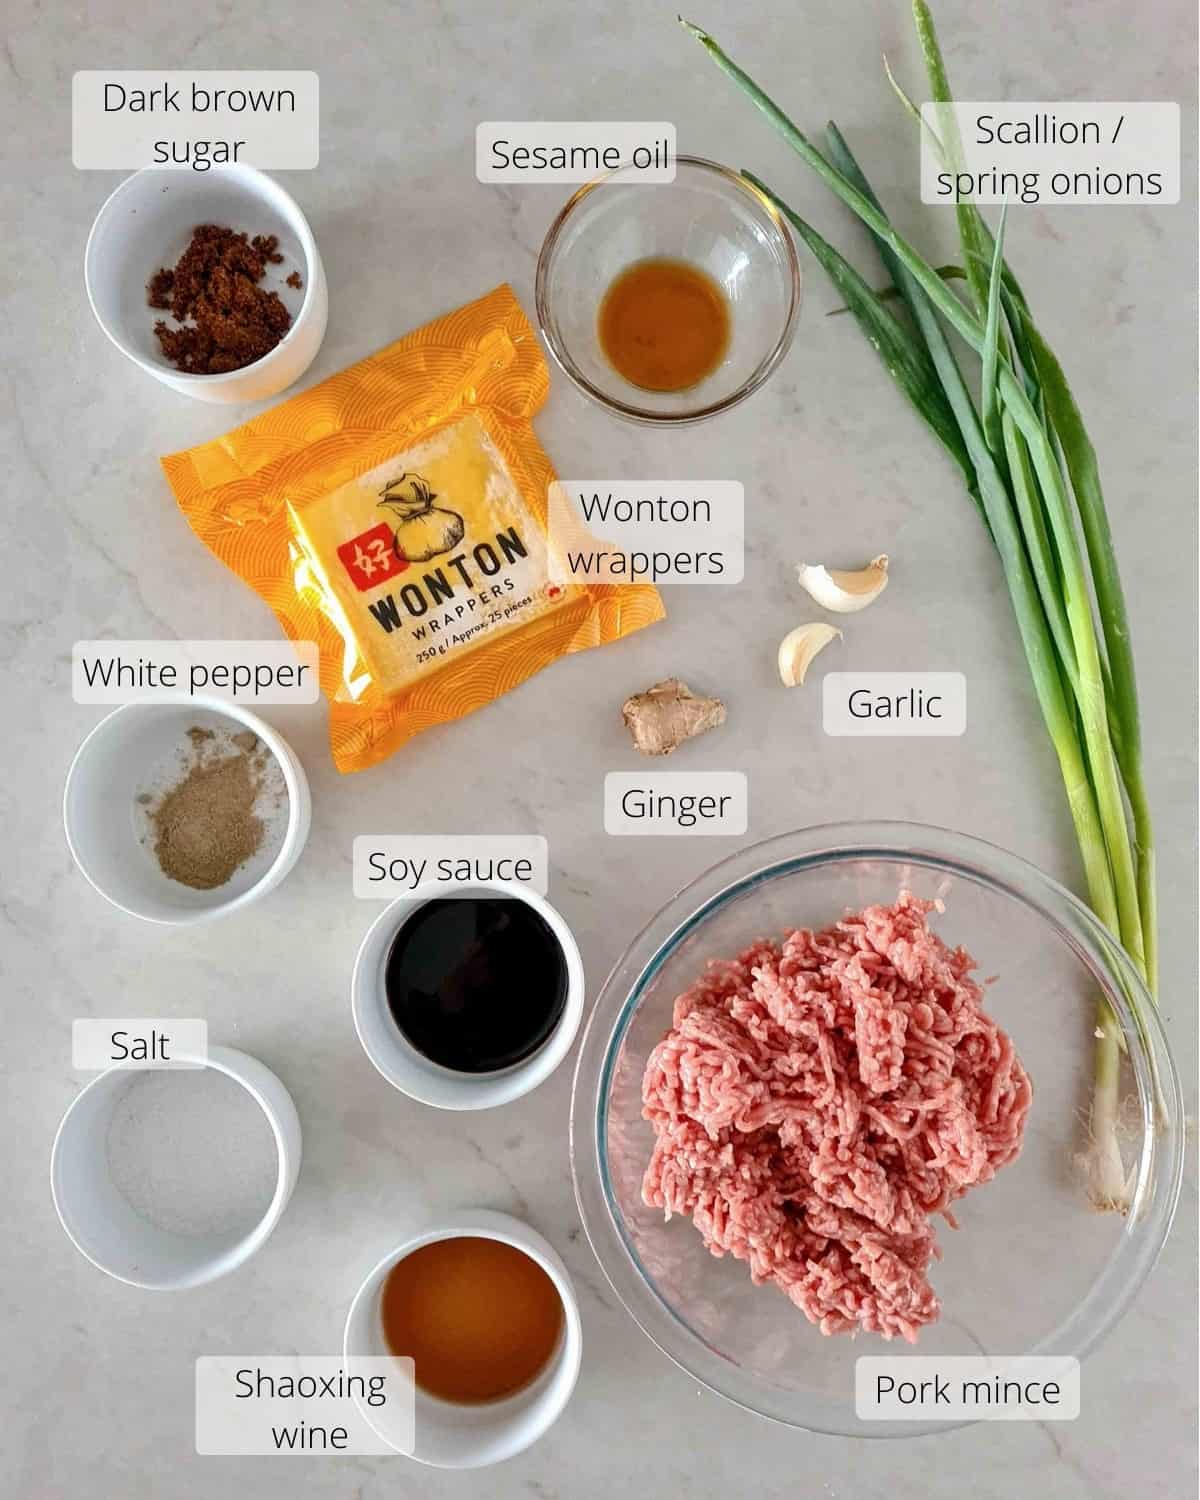 Ingredients required for this recipe